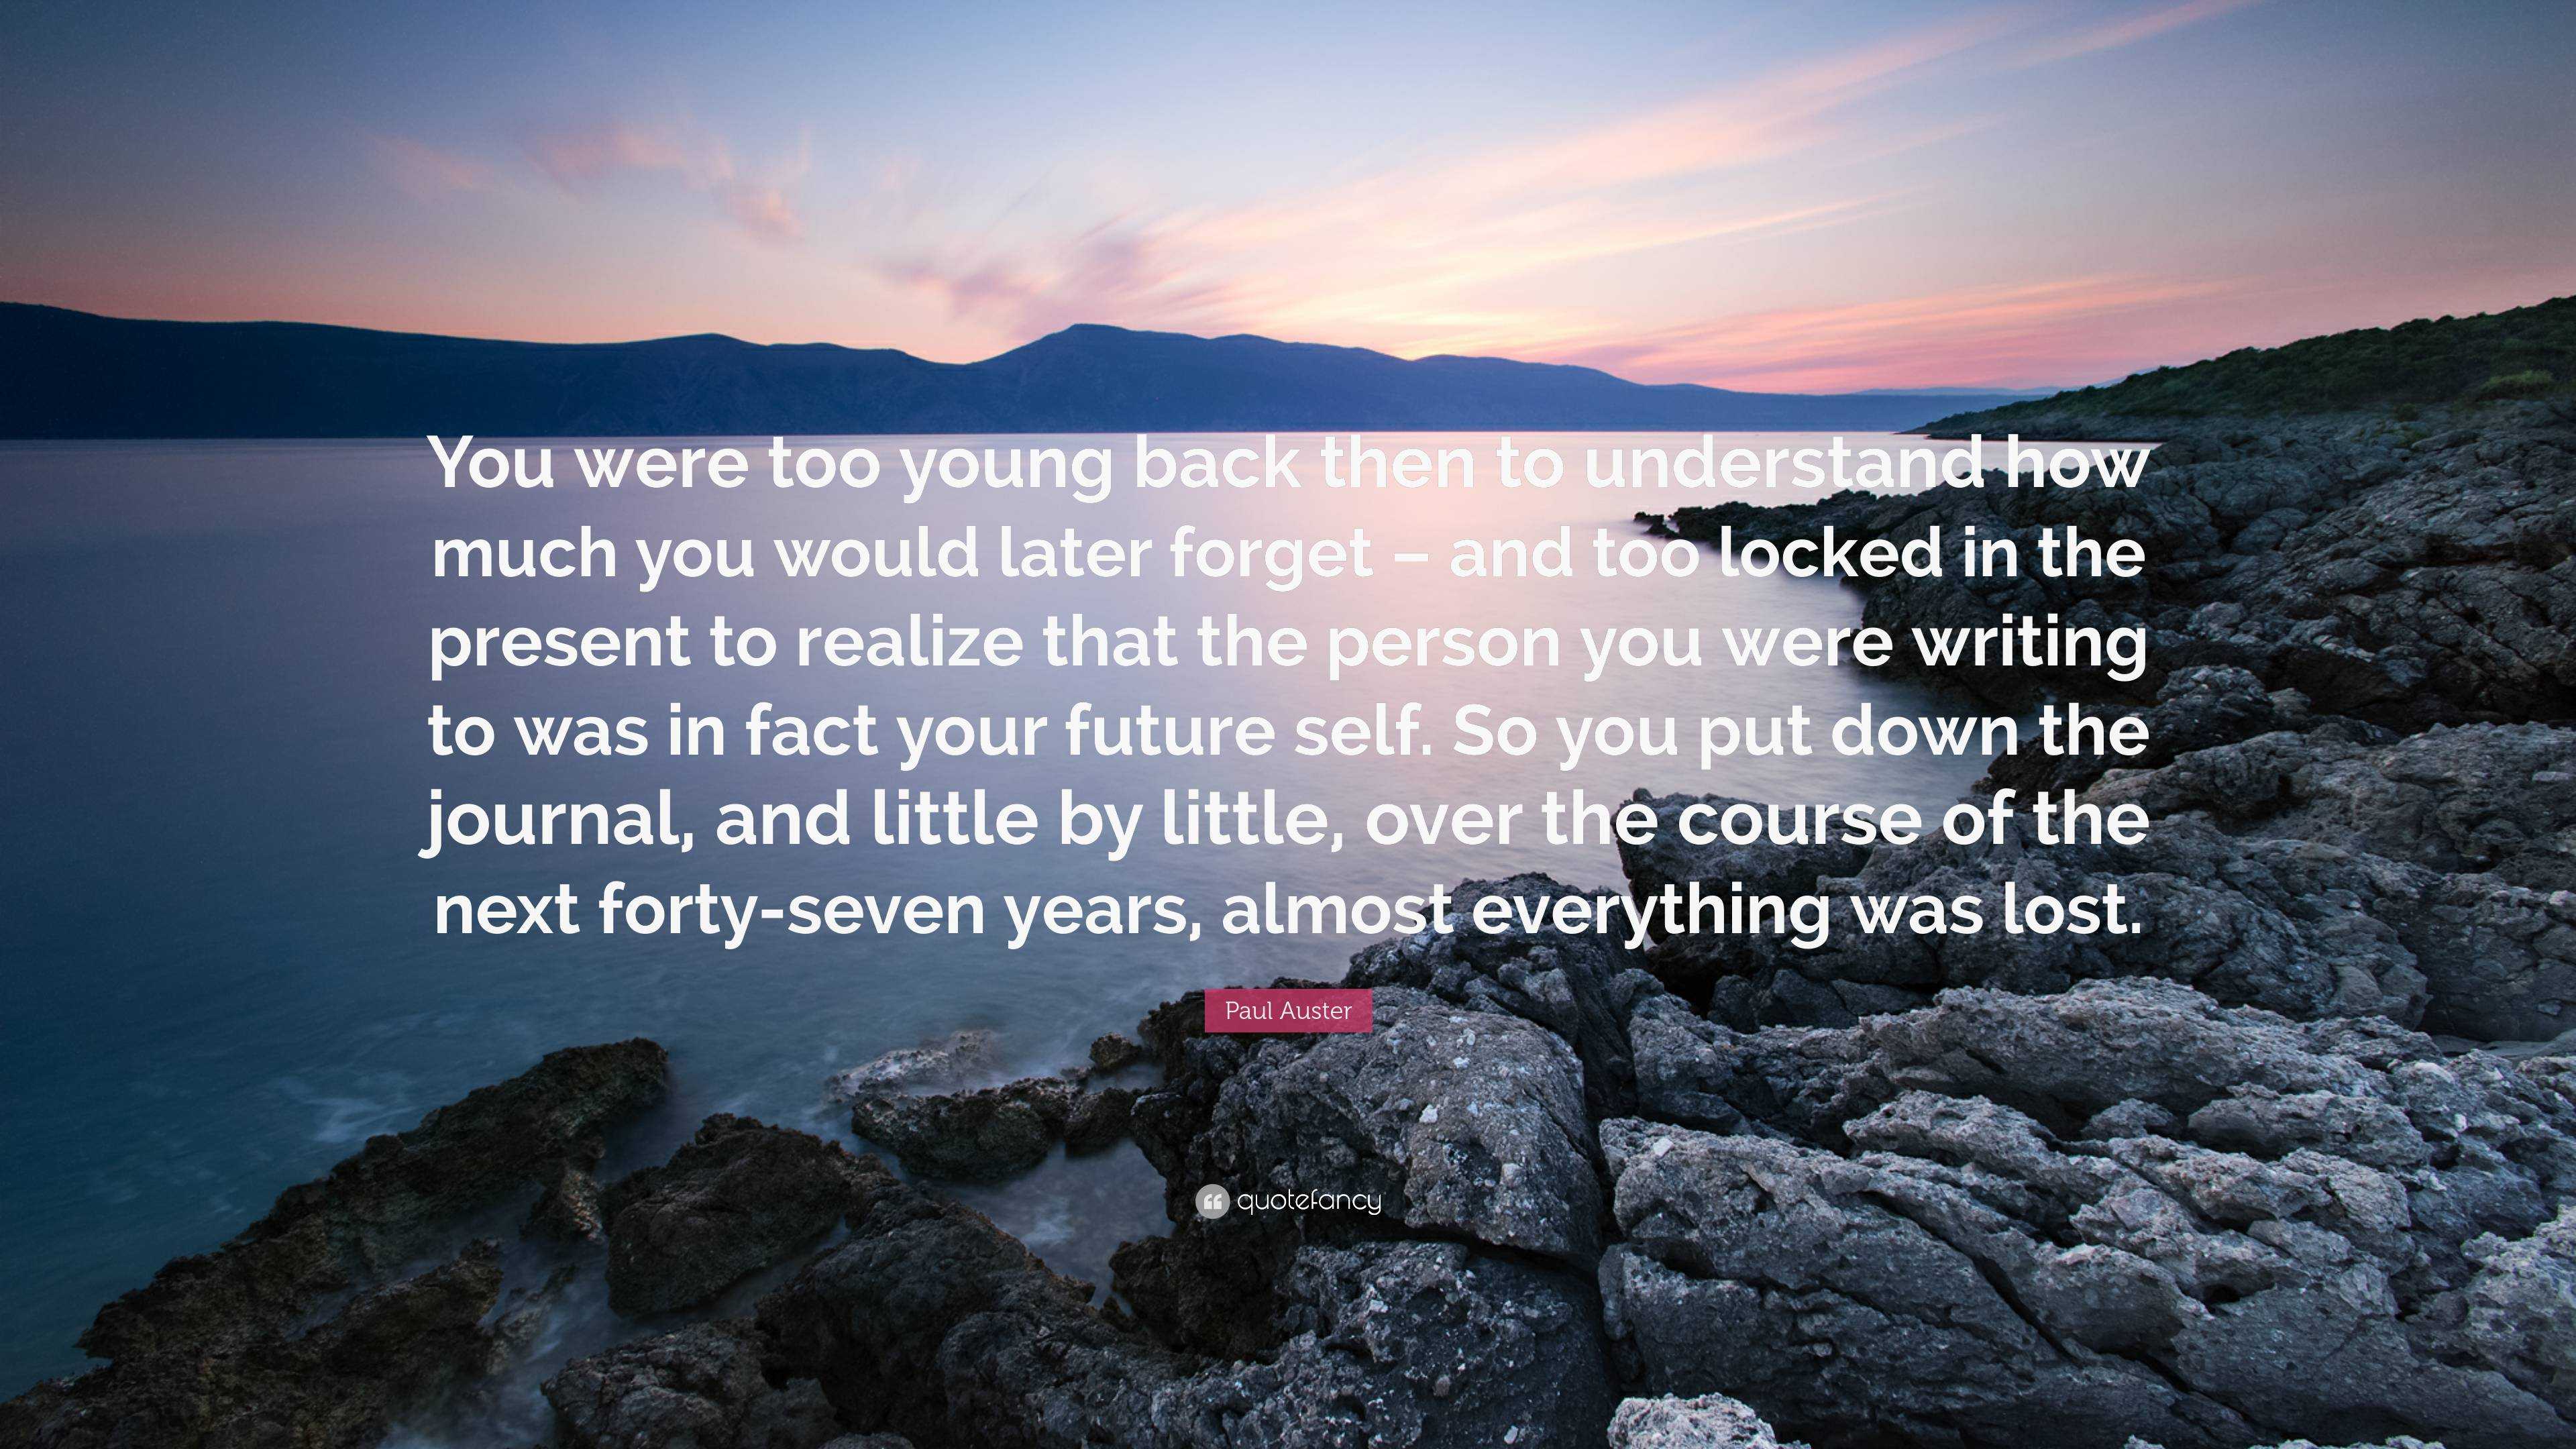 Paul Auster Quote: “You were too young back then to understand how much you  would later forget – and too locked in the present to realize th”